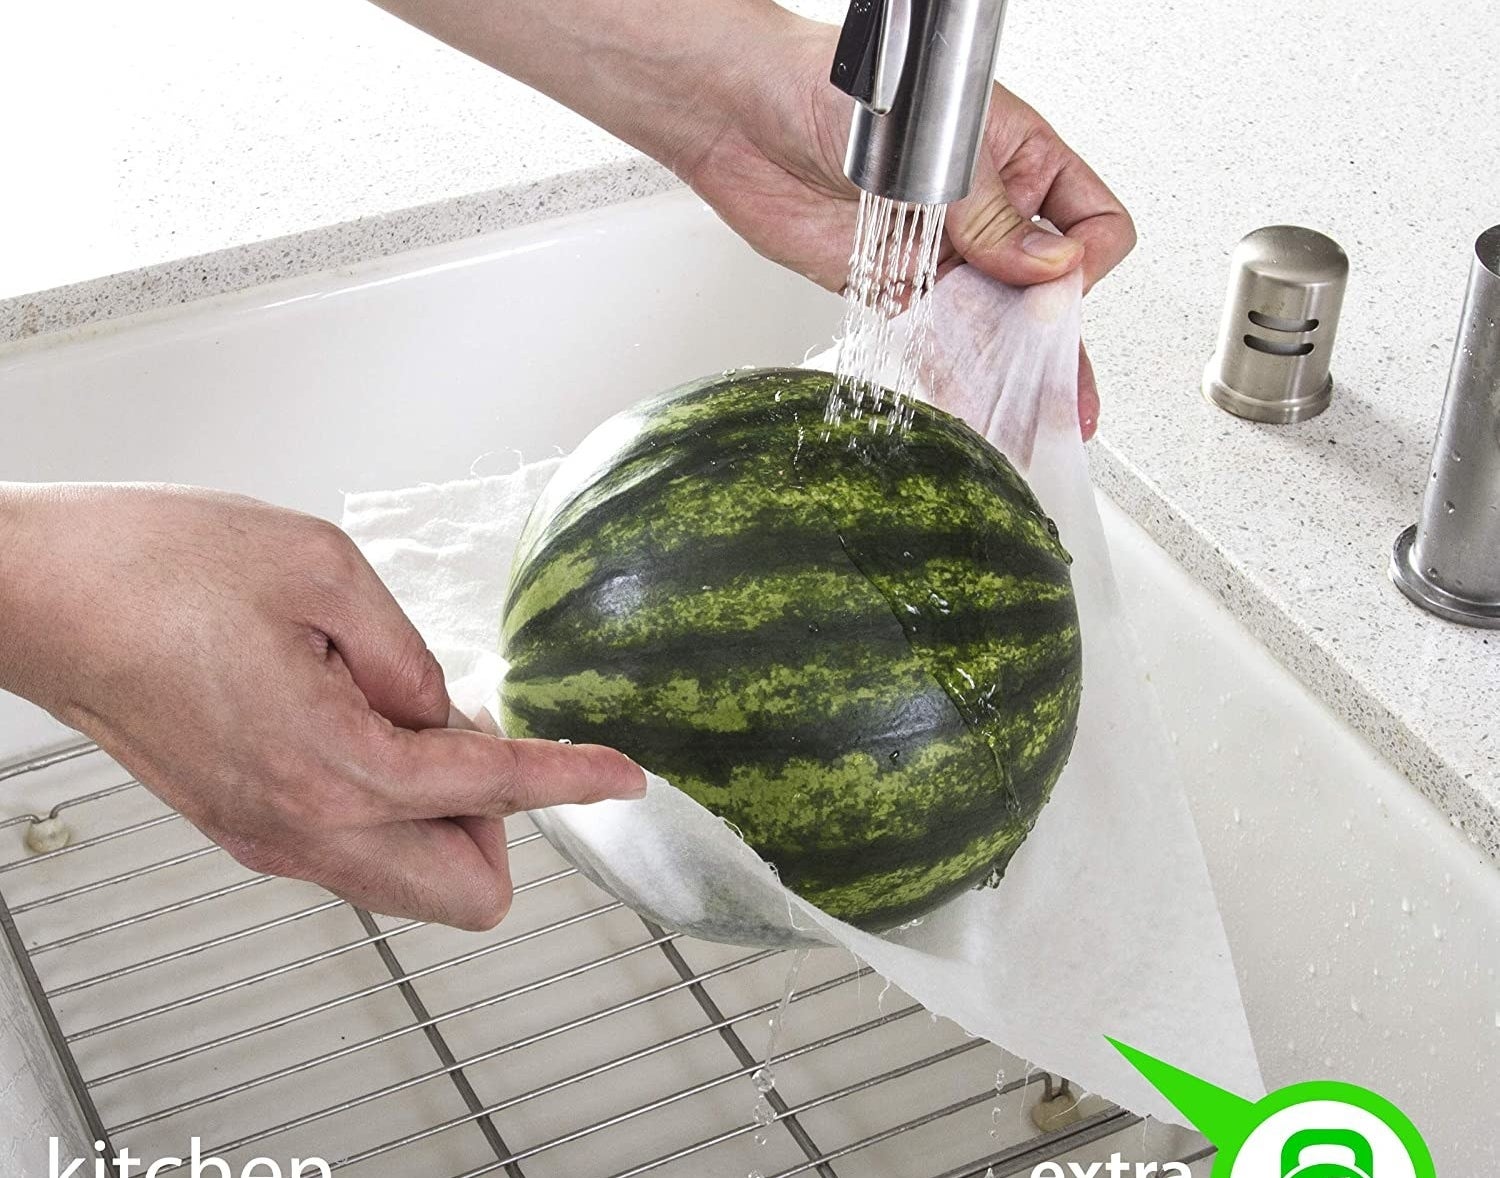 model washes a watermelon while holding it up with wet paper towel 